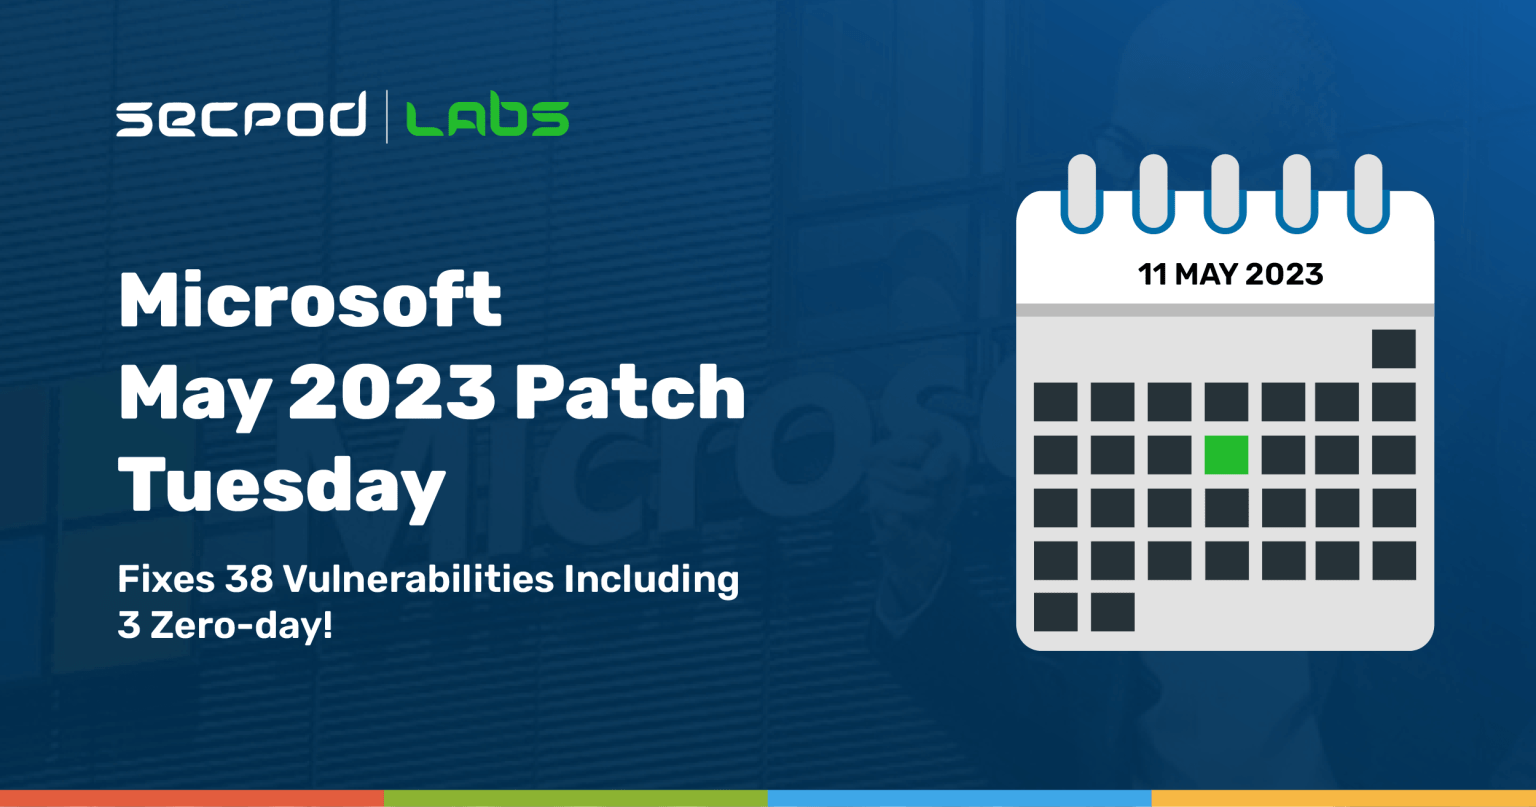 Microsoft May 2023 Patch Tuesday Fixes 38 Flaws with 3 Zeroday!